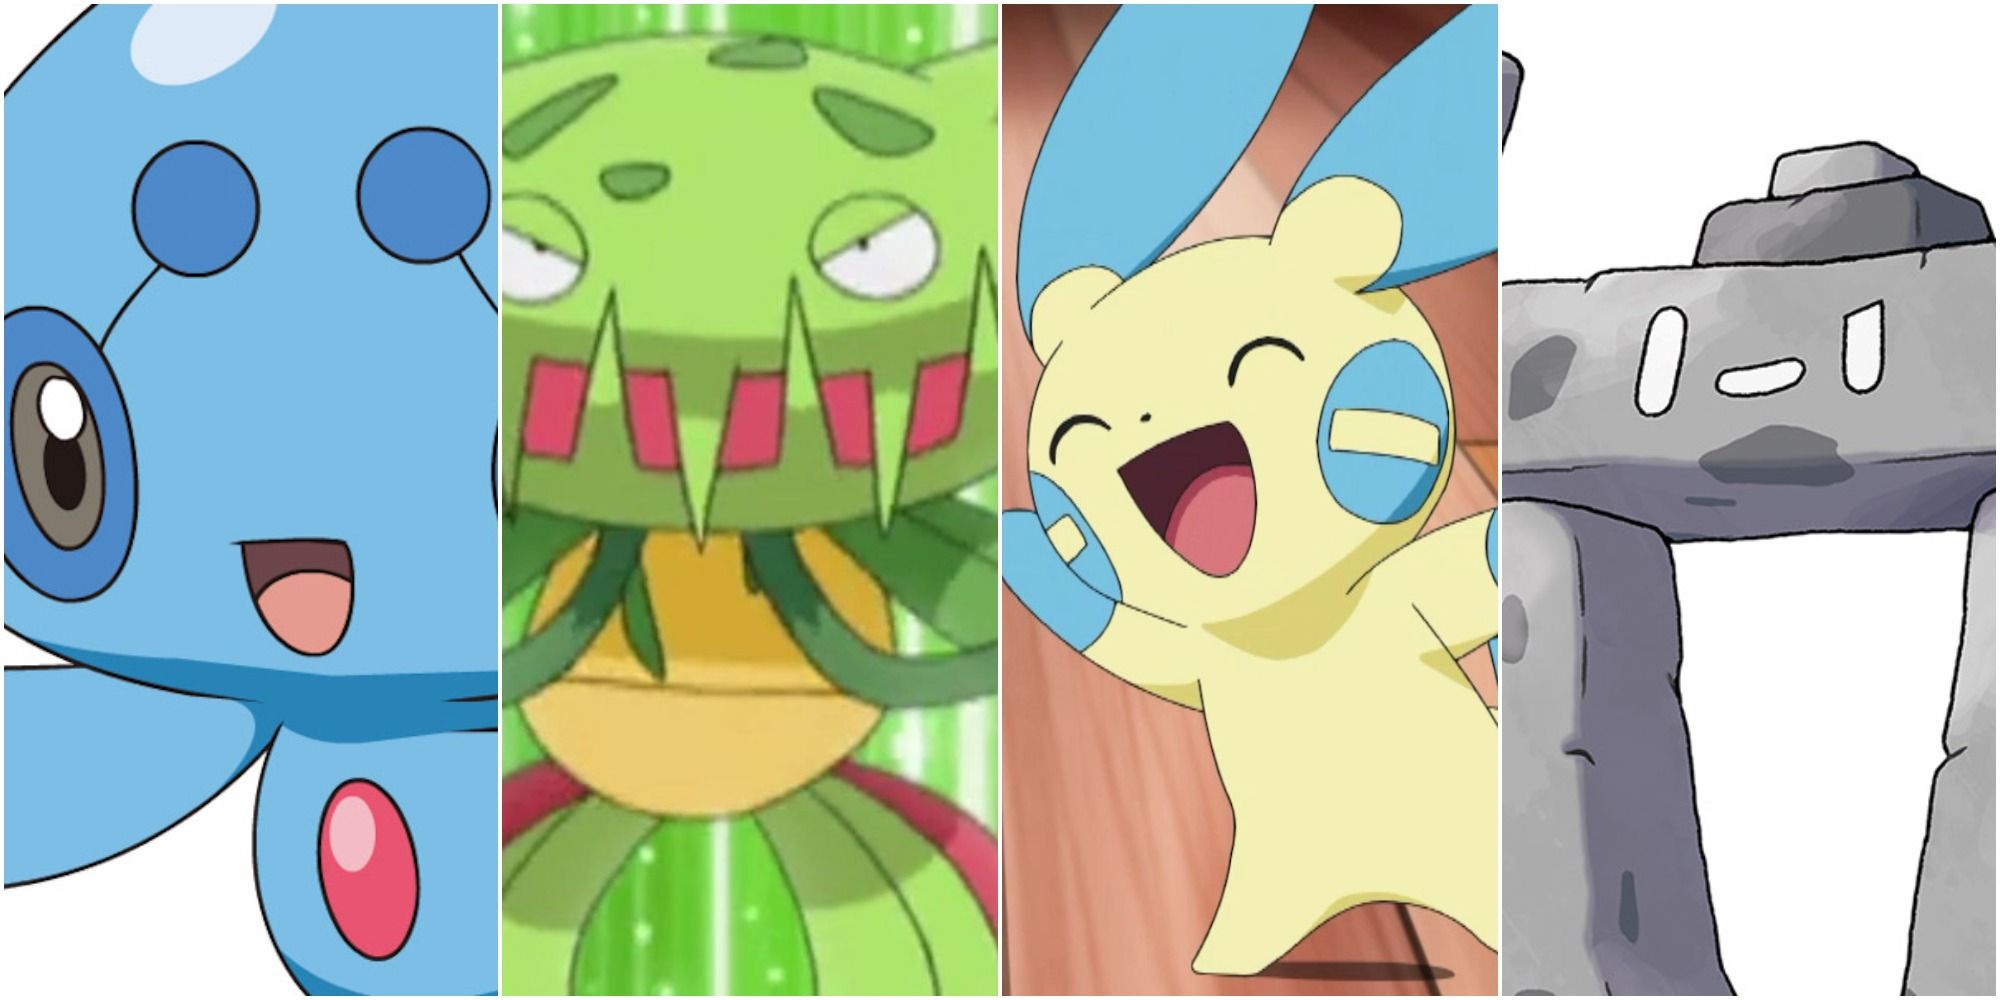 Pokemon Regional Variants Feature with Phione, Carnivine, Minun, and Stonjourner